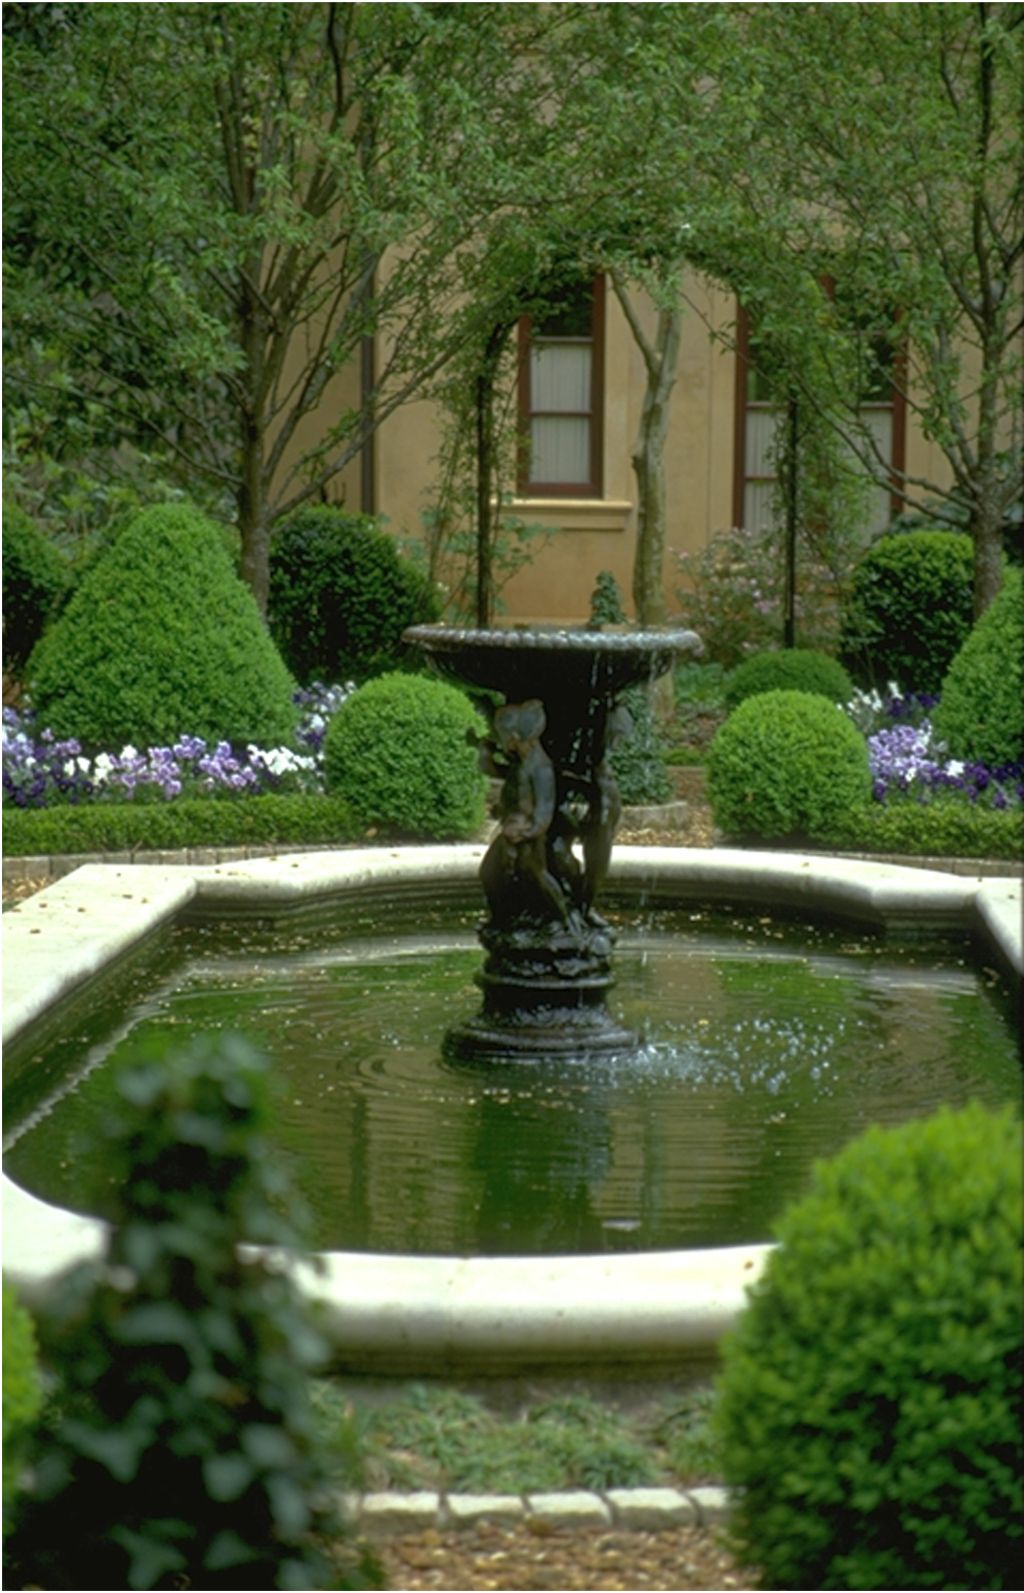 fountain fountains yard landscape water garden pond courtyard side backyard landscaping feature gardens collect outdoor hannah statues later pool